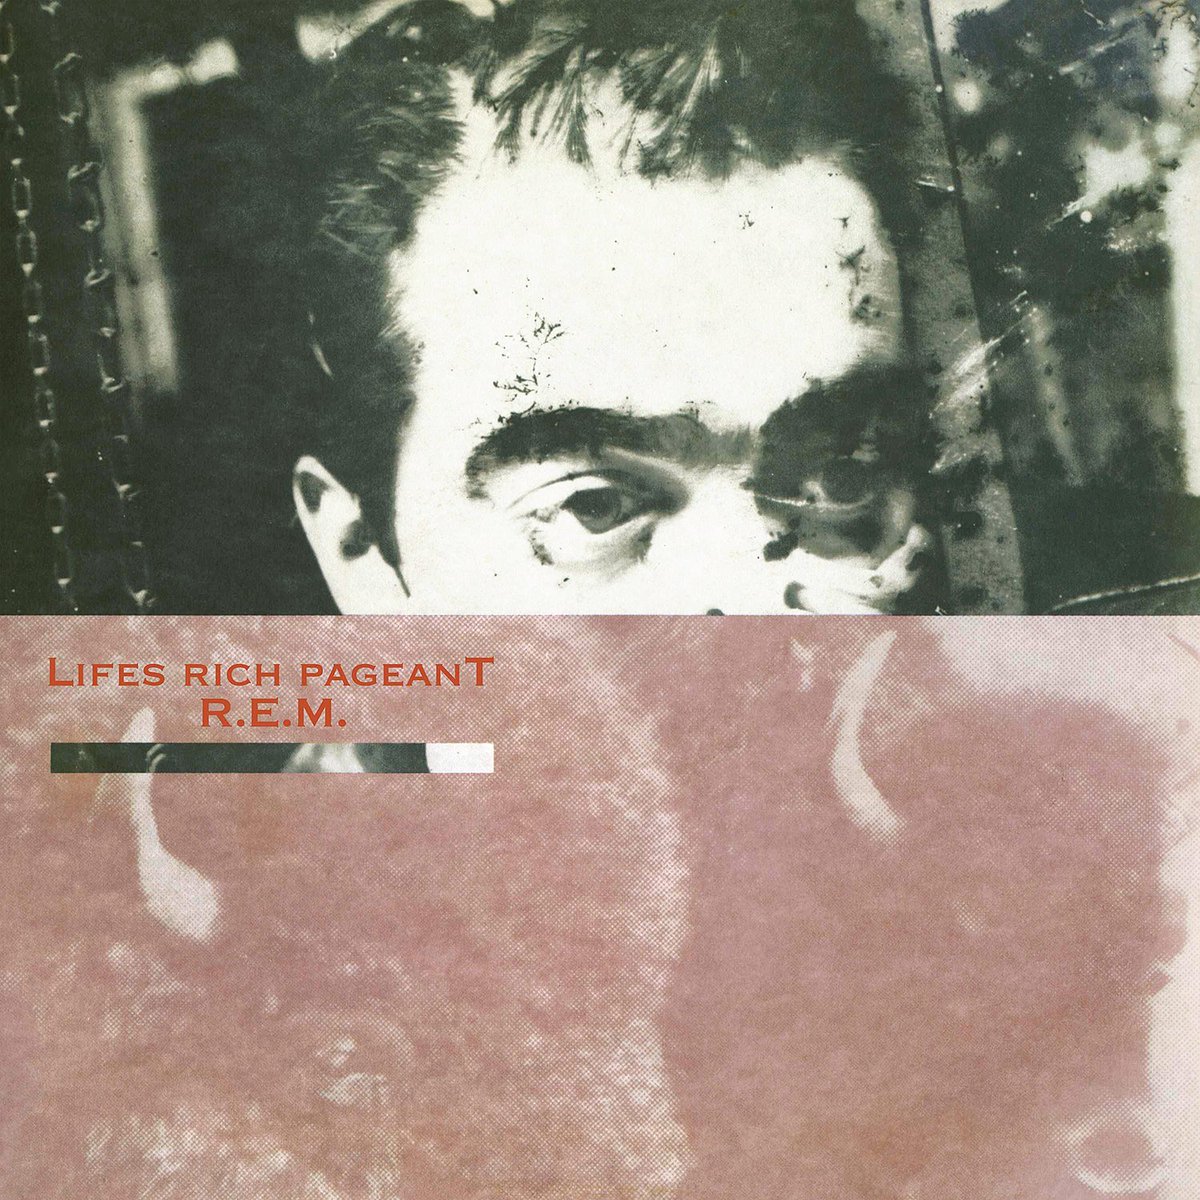 On Monday we begin our deep-dive into LIFES RICH PAGEANT by R.E.M.! But what do YOU think of this record? Love it? Hate it? Somewhere in between? Is it a bold reinvention or a course correct? Favourite tracks? Tell us all! (And catch up with our FABLES episodes!) #remband